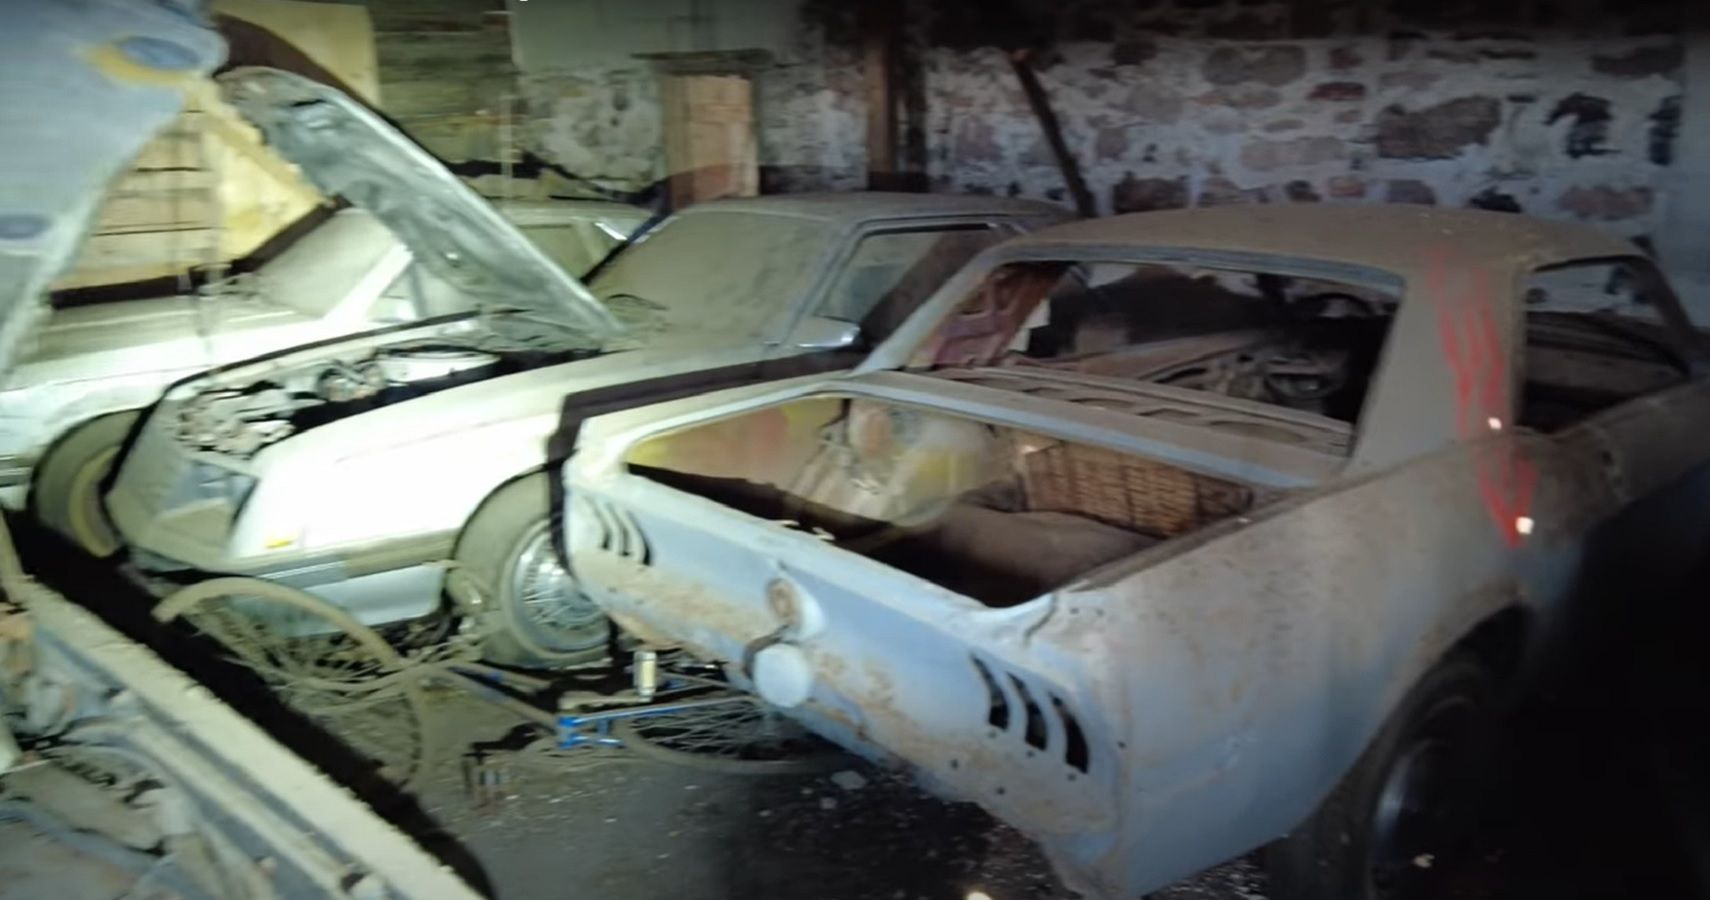 Huge Barn Find Discovered And Filmed By Trespassing Teens